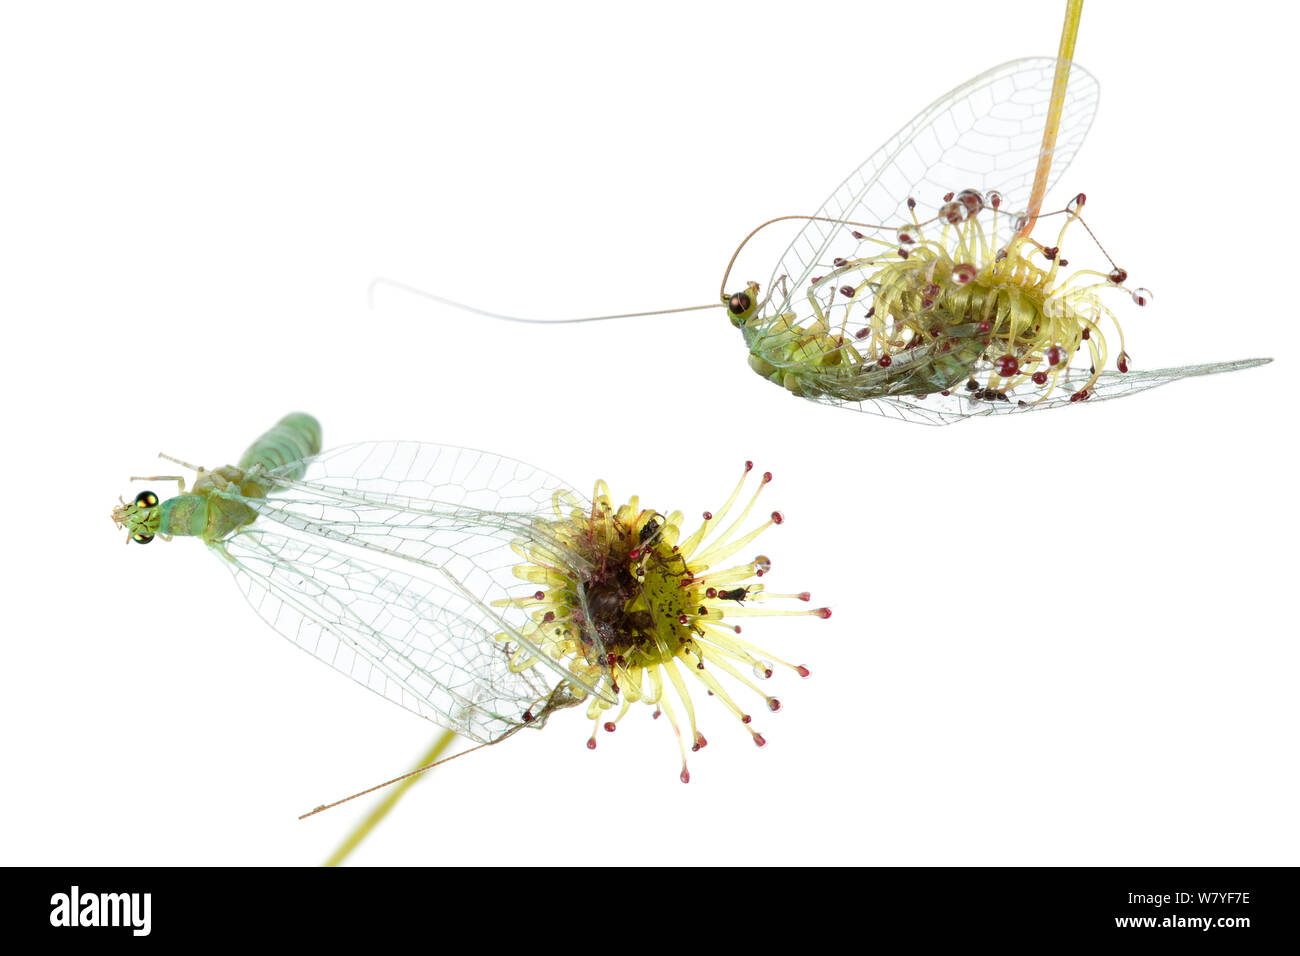 Bridal rainbow (Drosera macrantha) with captured lacewings, Western Australia. meetyourneighbours.net project Stock Photo